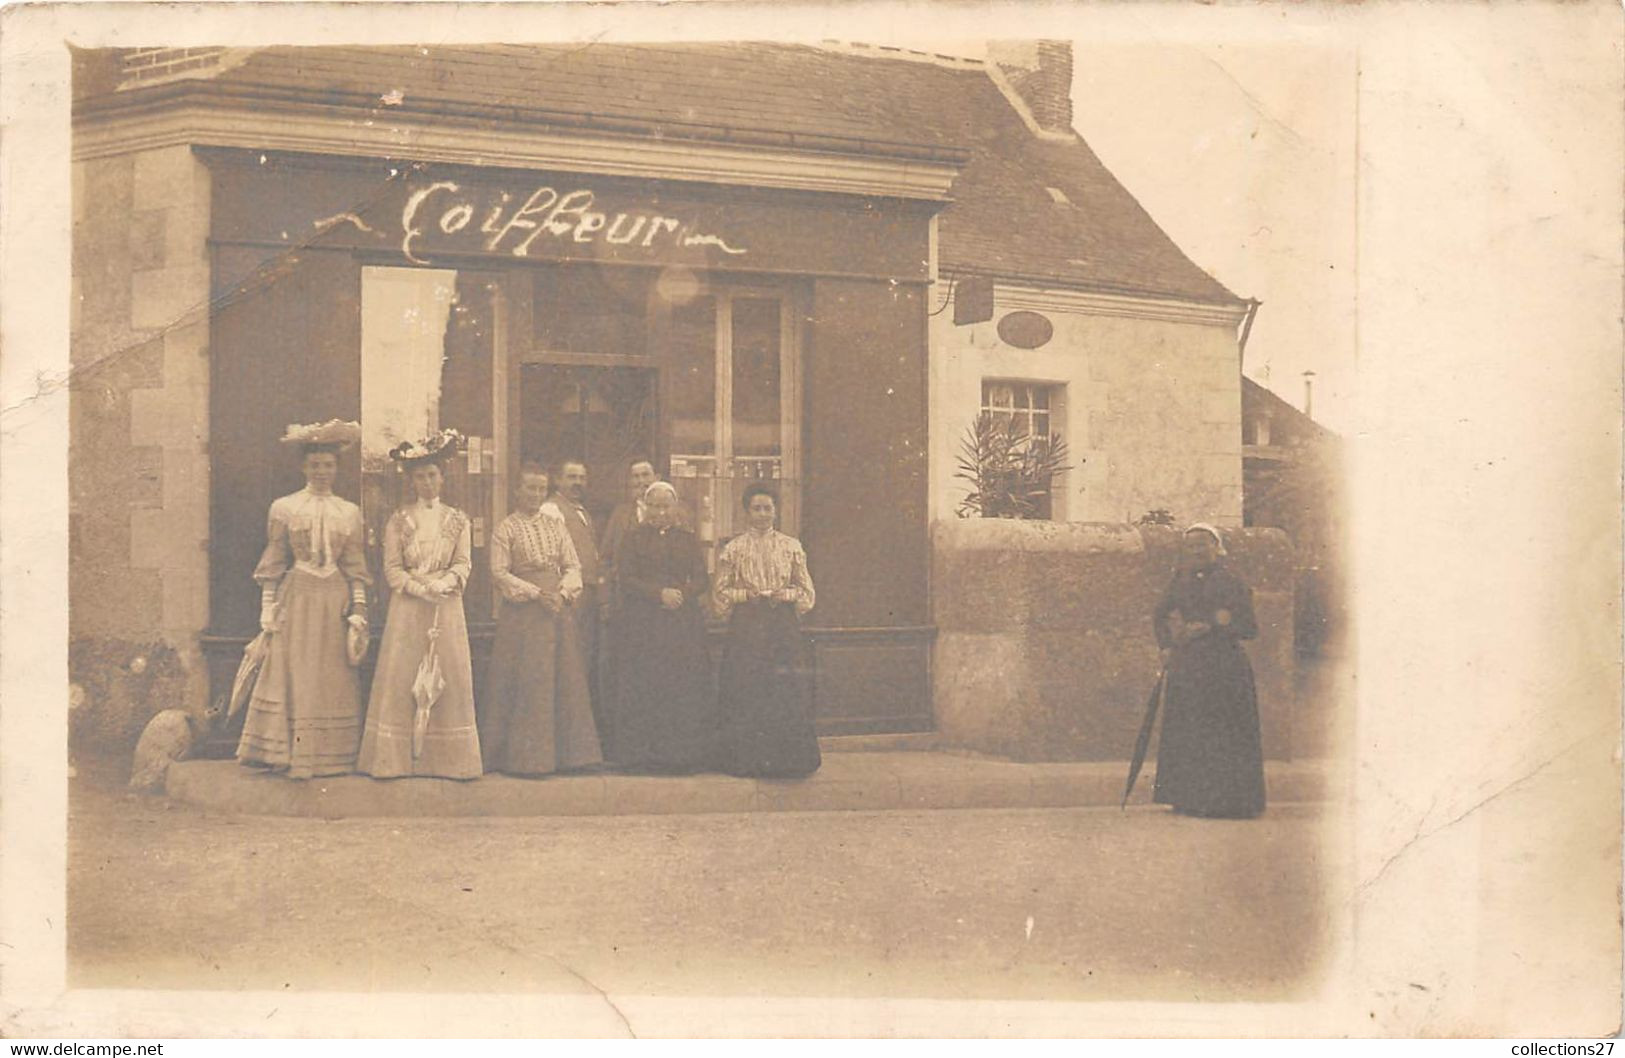 MAGASIN-COIFFEUR -CARTE-PHOTO A SITUER - Negozi